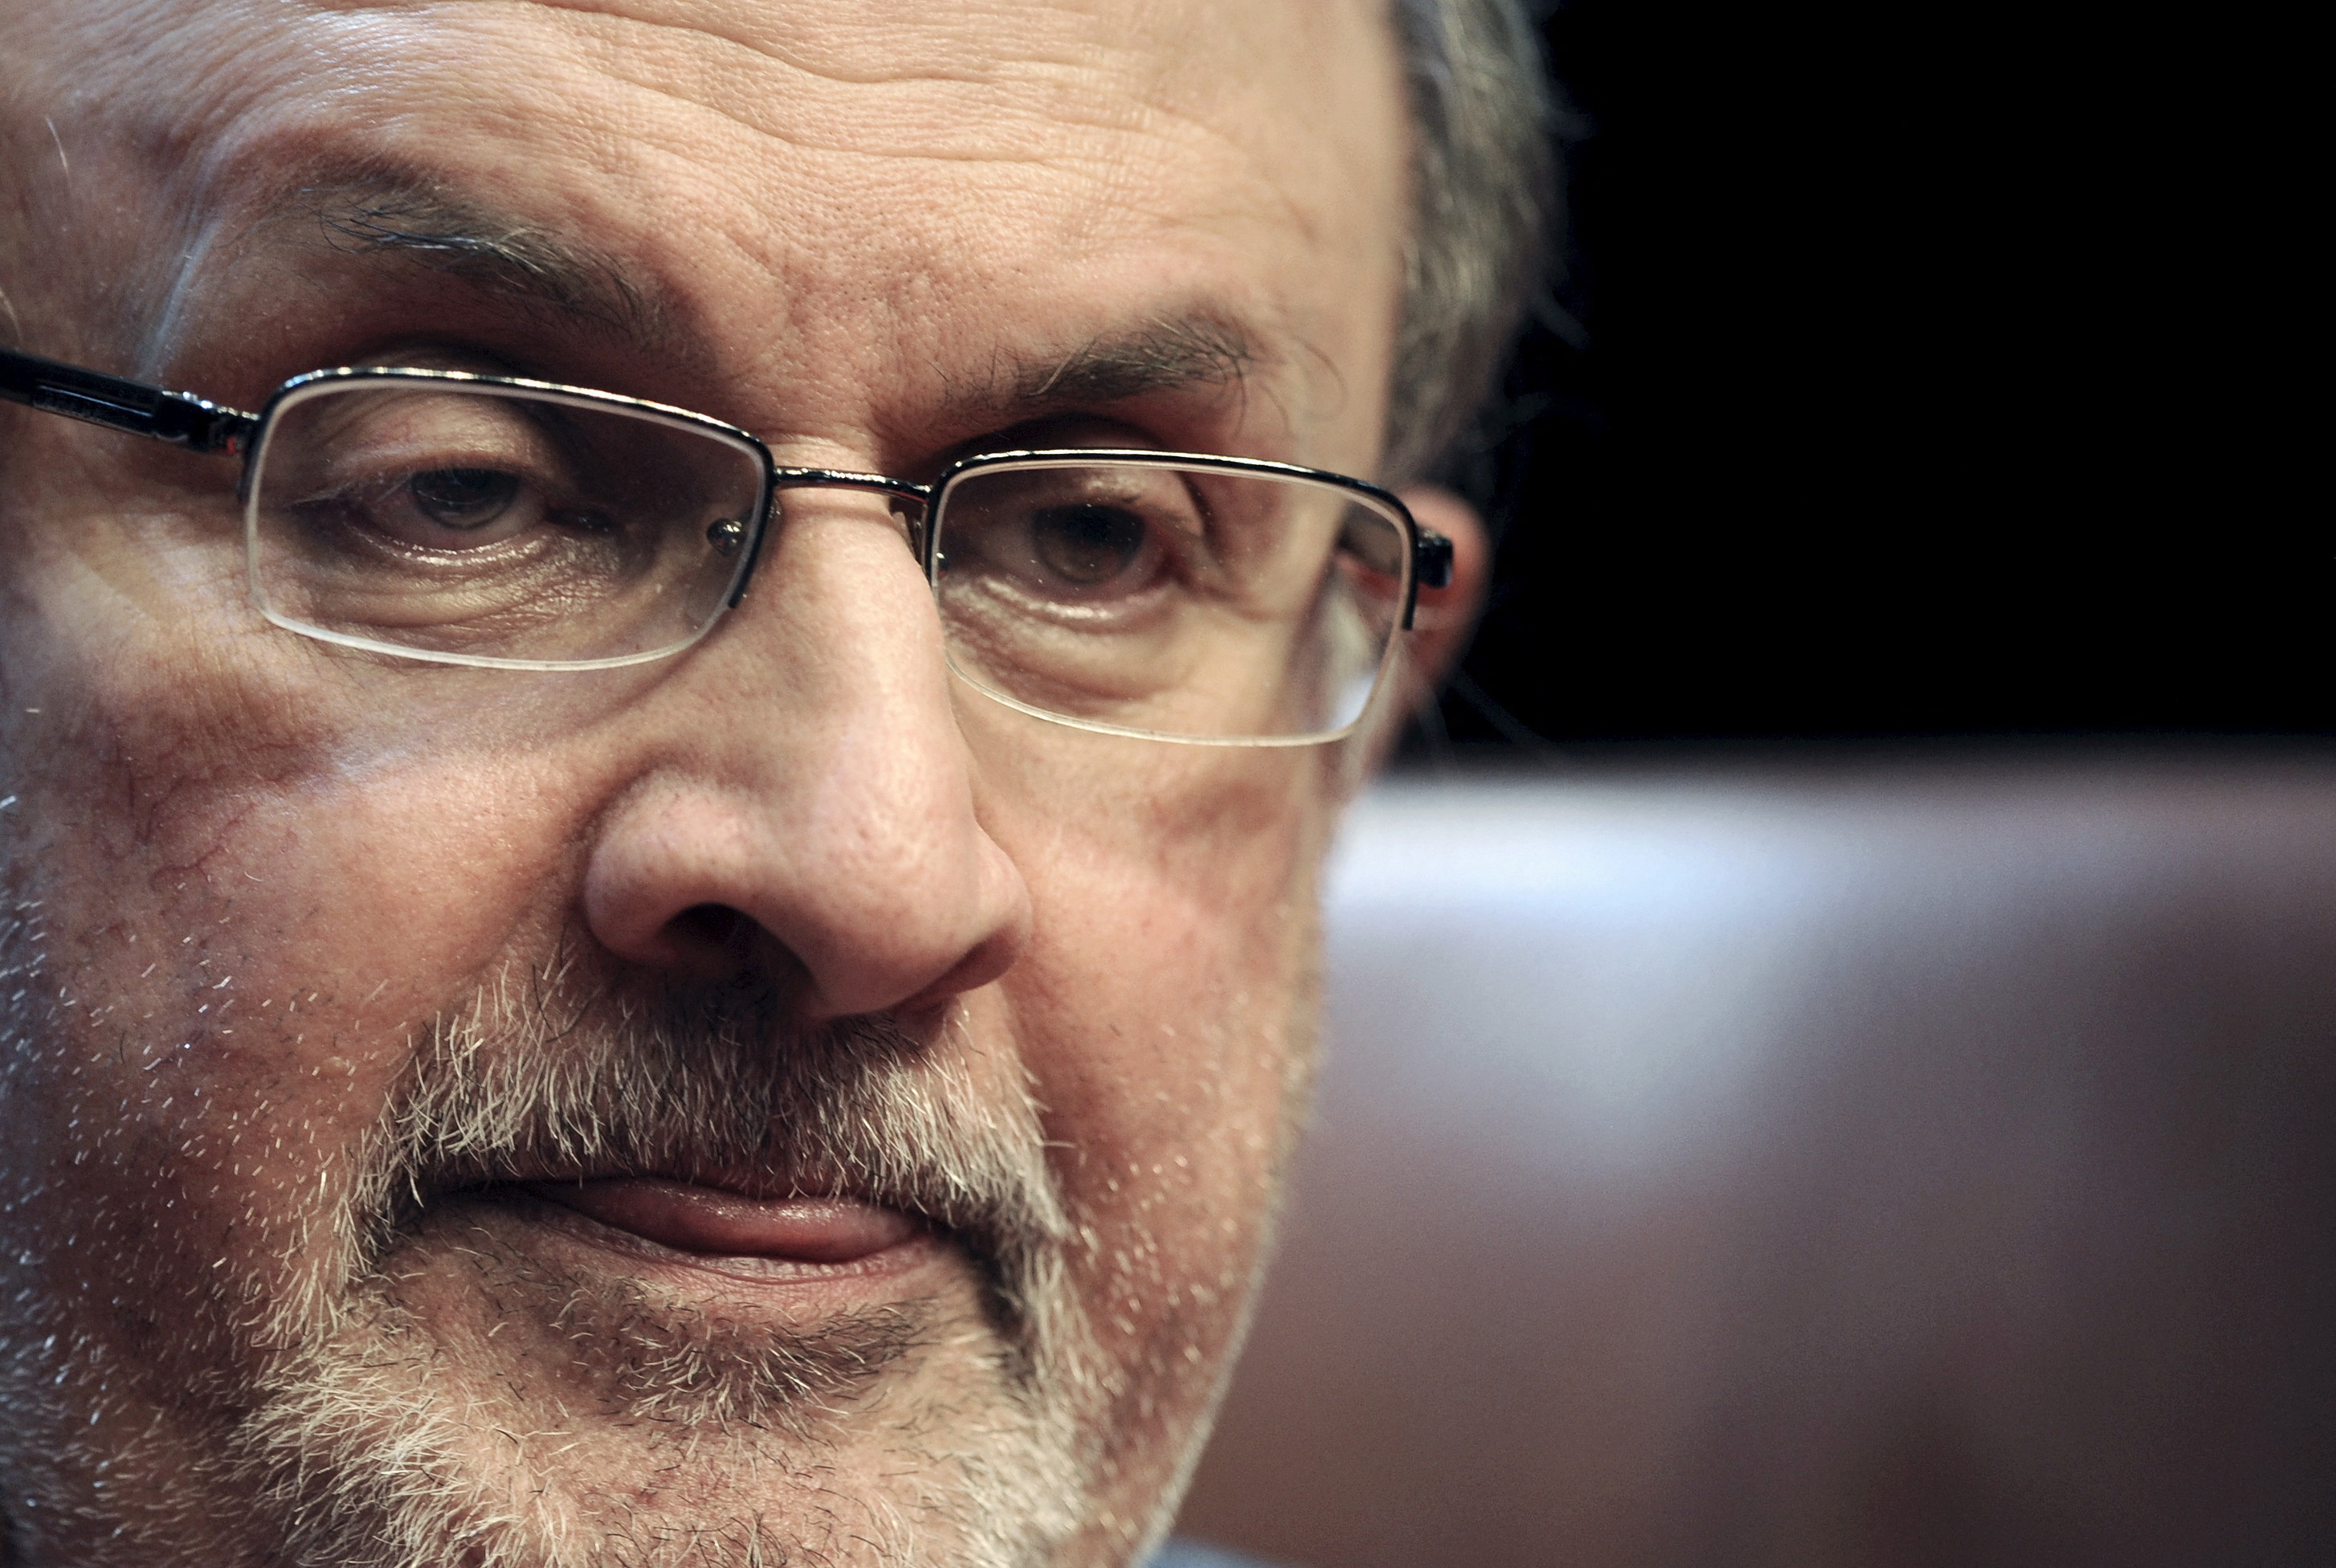 Author Rushdie responds at a press conference prior to the launch of his latest book, Two Years Eight Months and Twenty-Eight Nights, at the Niemeyer Center in Aviles.